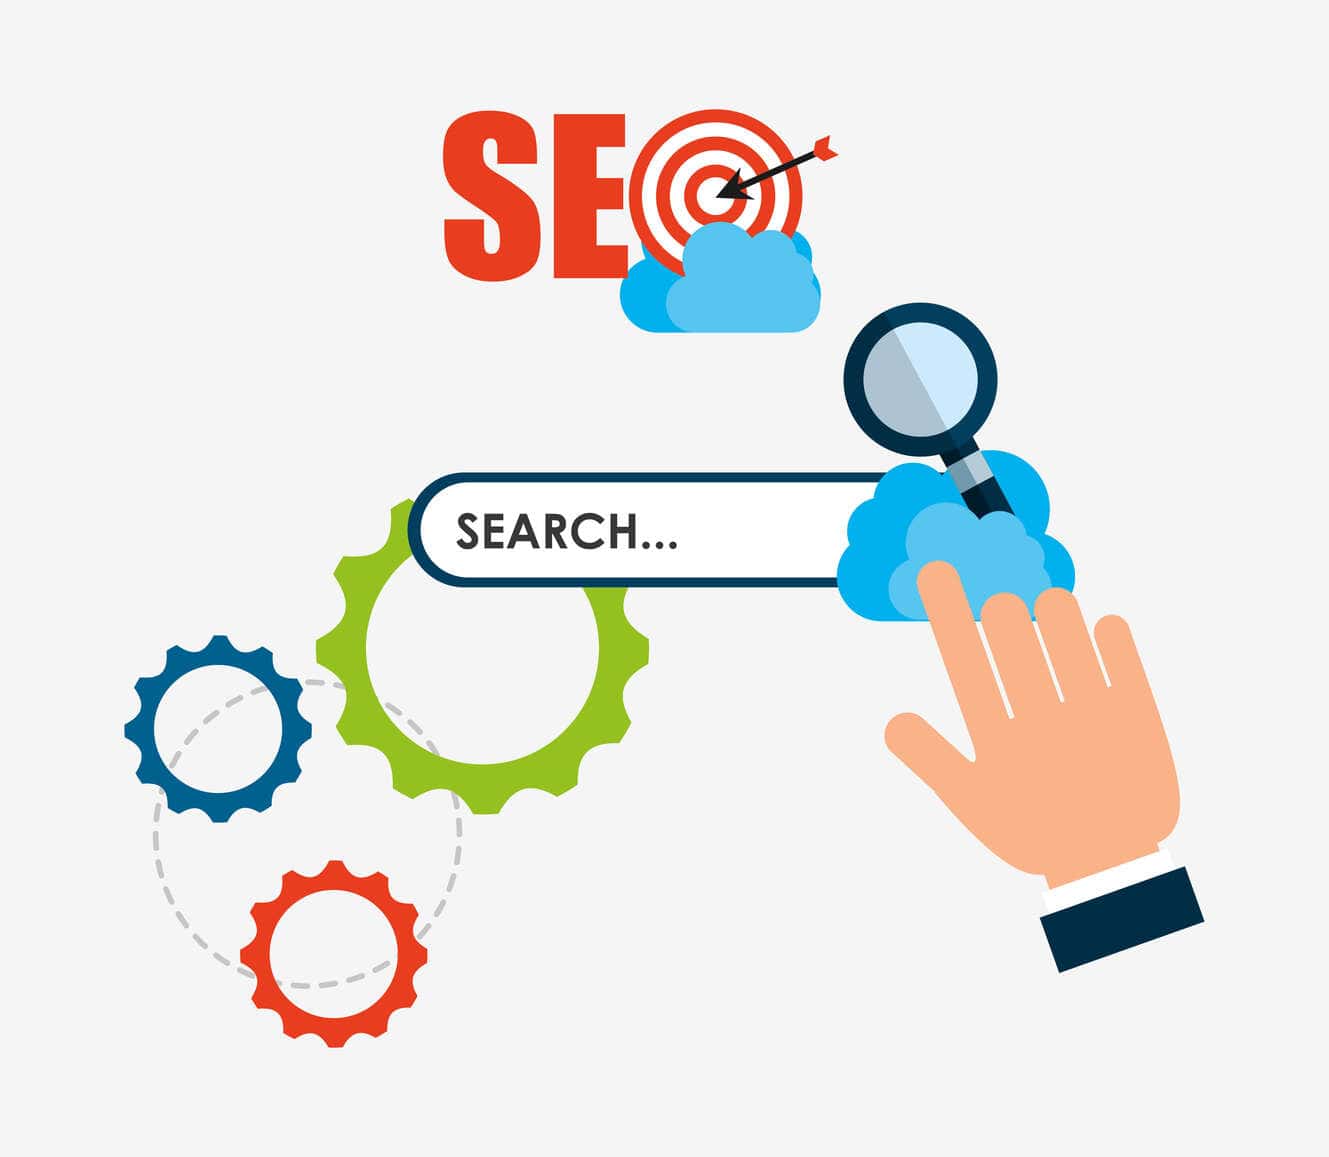 The importance of SEO in digital marketing, the different types of SEO techniques, and how to employ them.